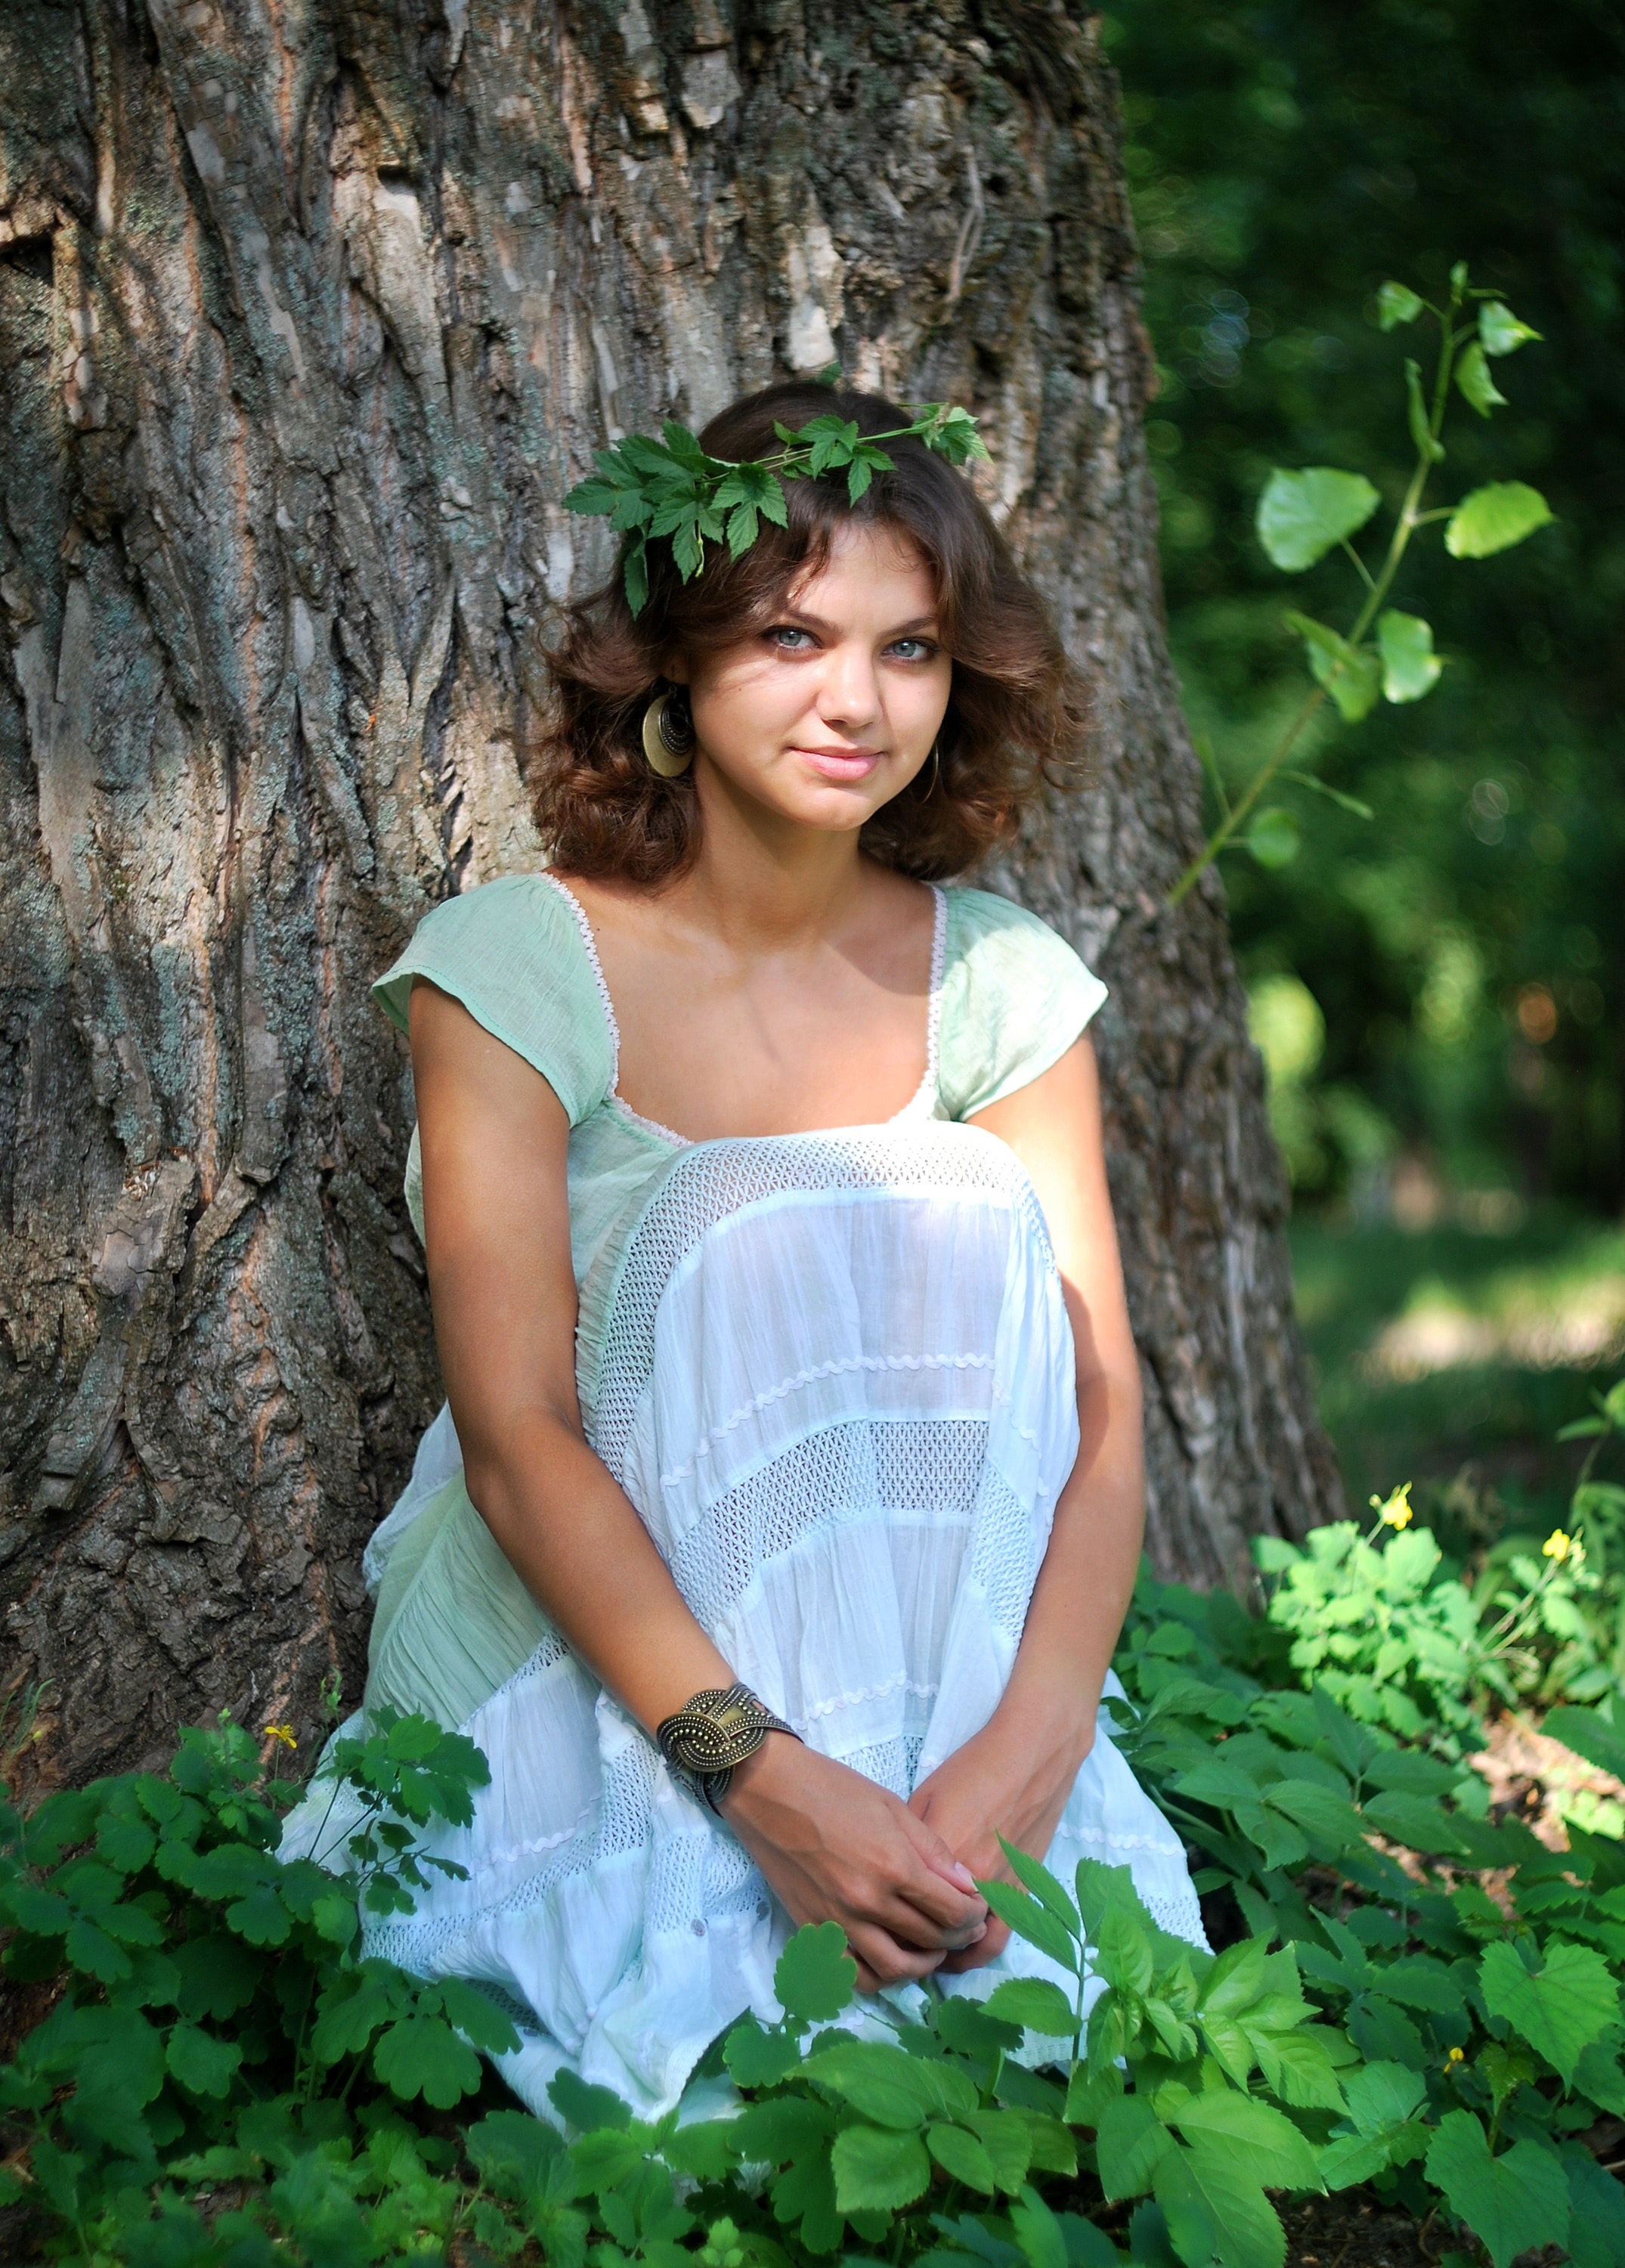 Smiling woman wearing green leaf crown with green and white sleeveless dress sitting in green leaf during day time photo